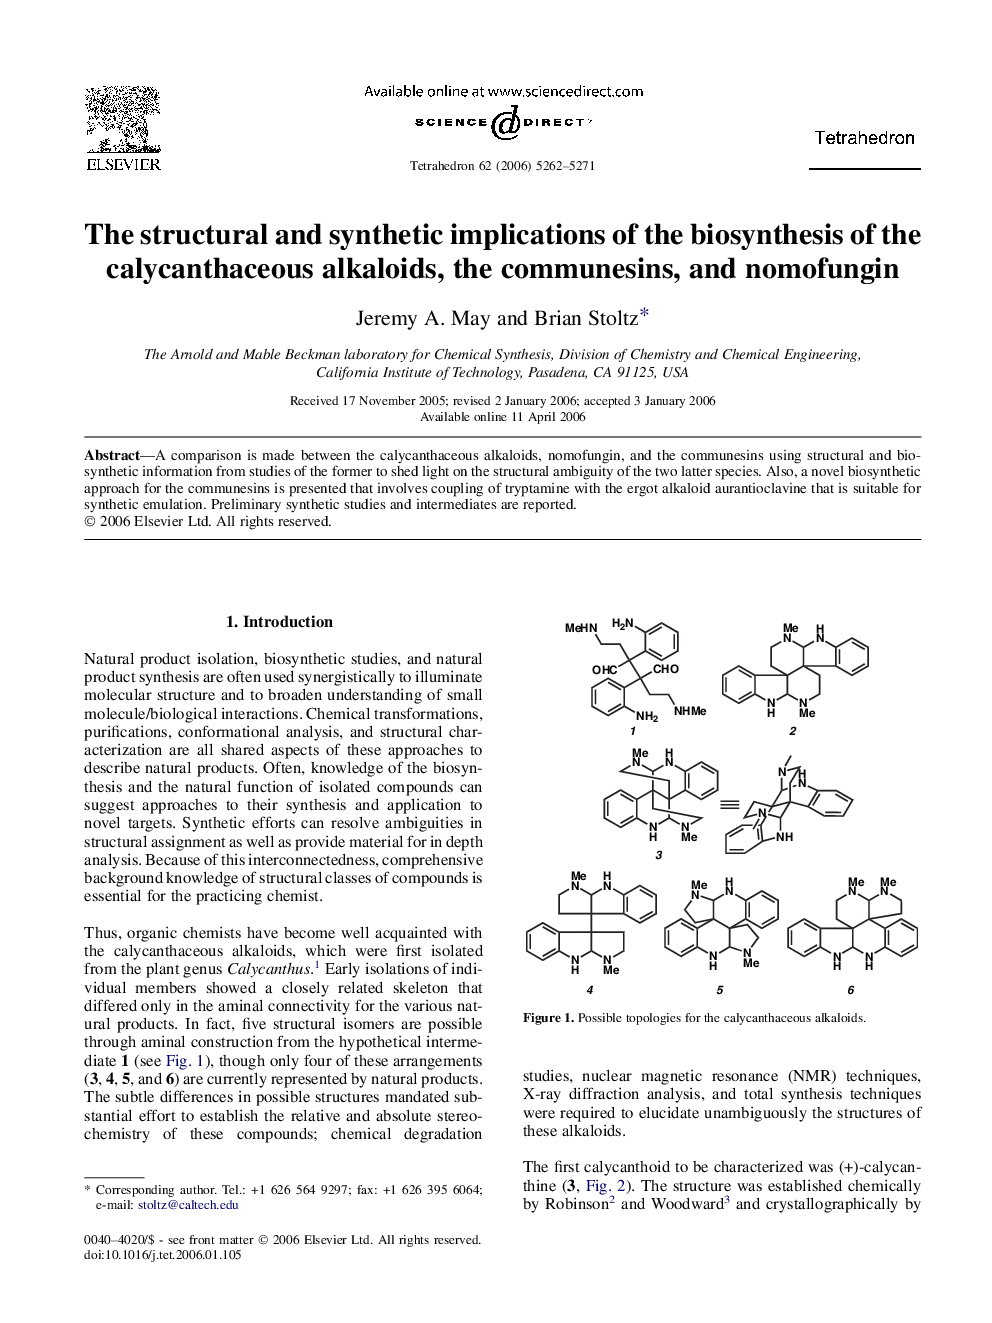 The structural and synthetic implications of the biosynthesis of the calycanthaceous alkaloids, the communesins, and nomofungin